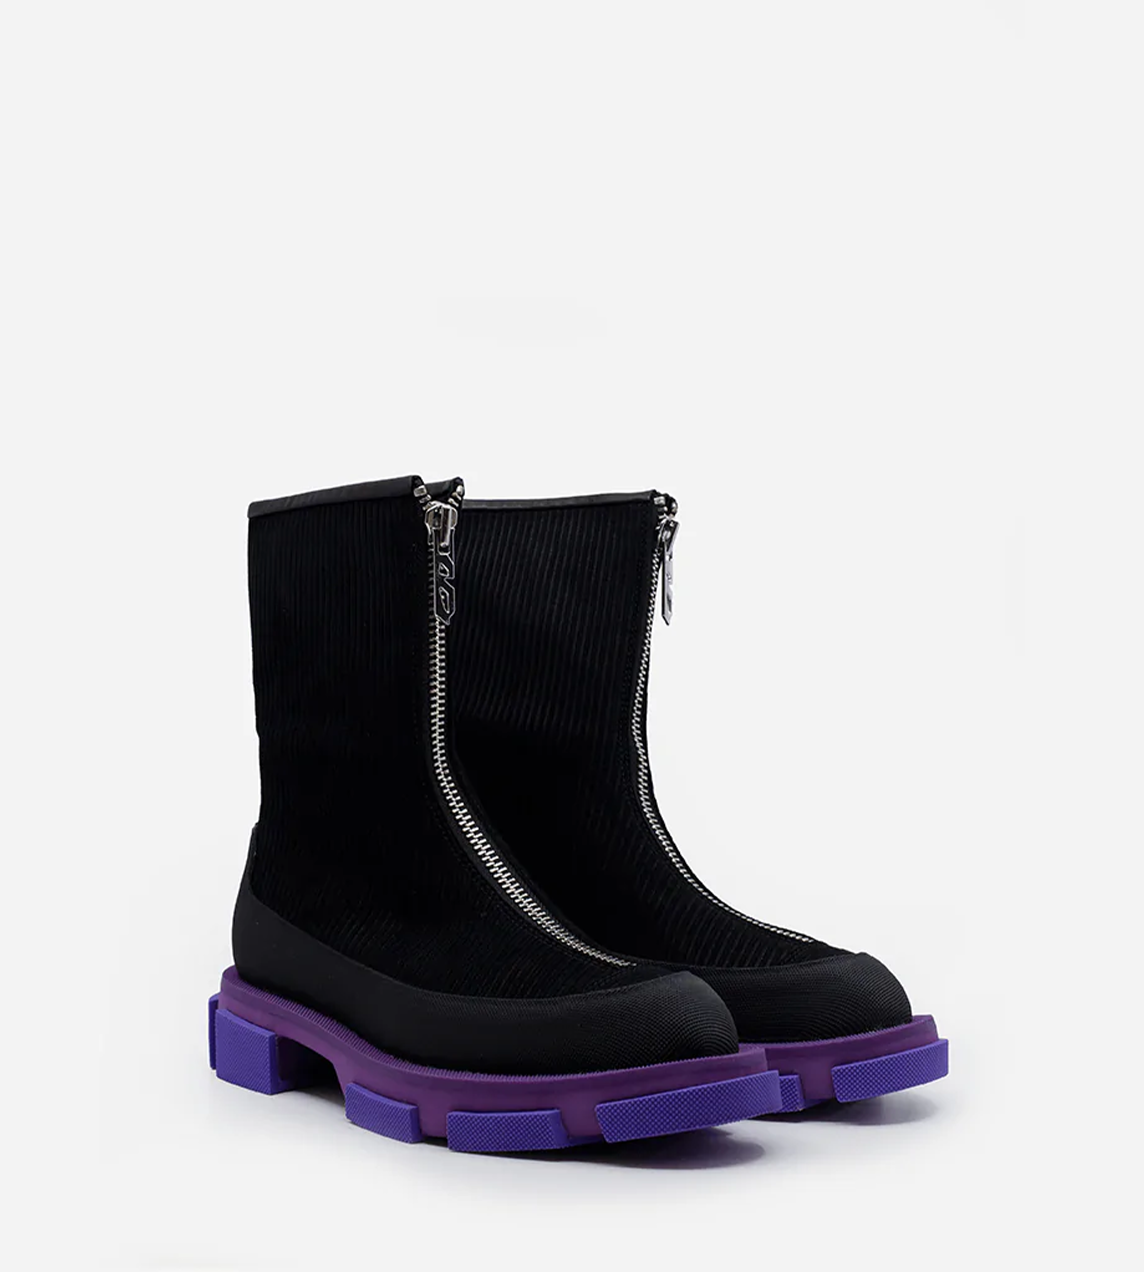 Both - Gao Two-Way Boots Black/Purple